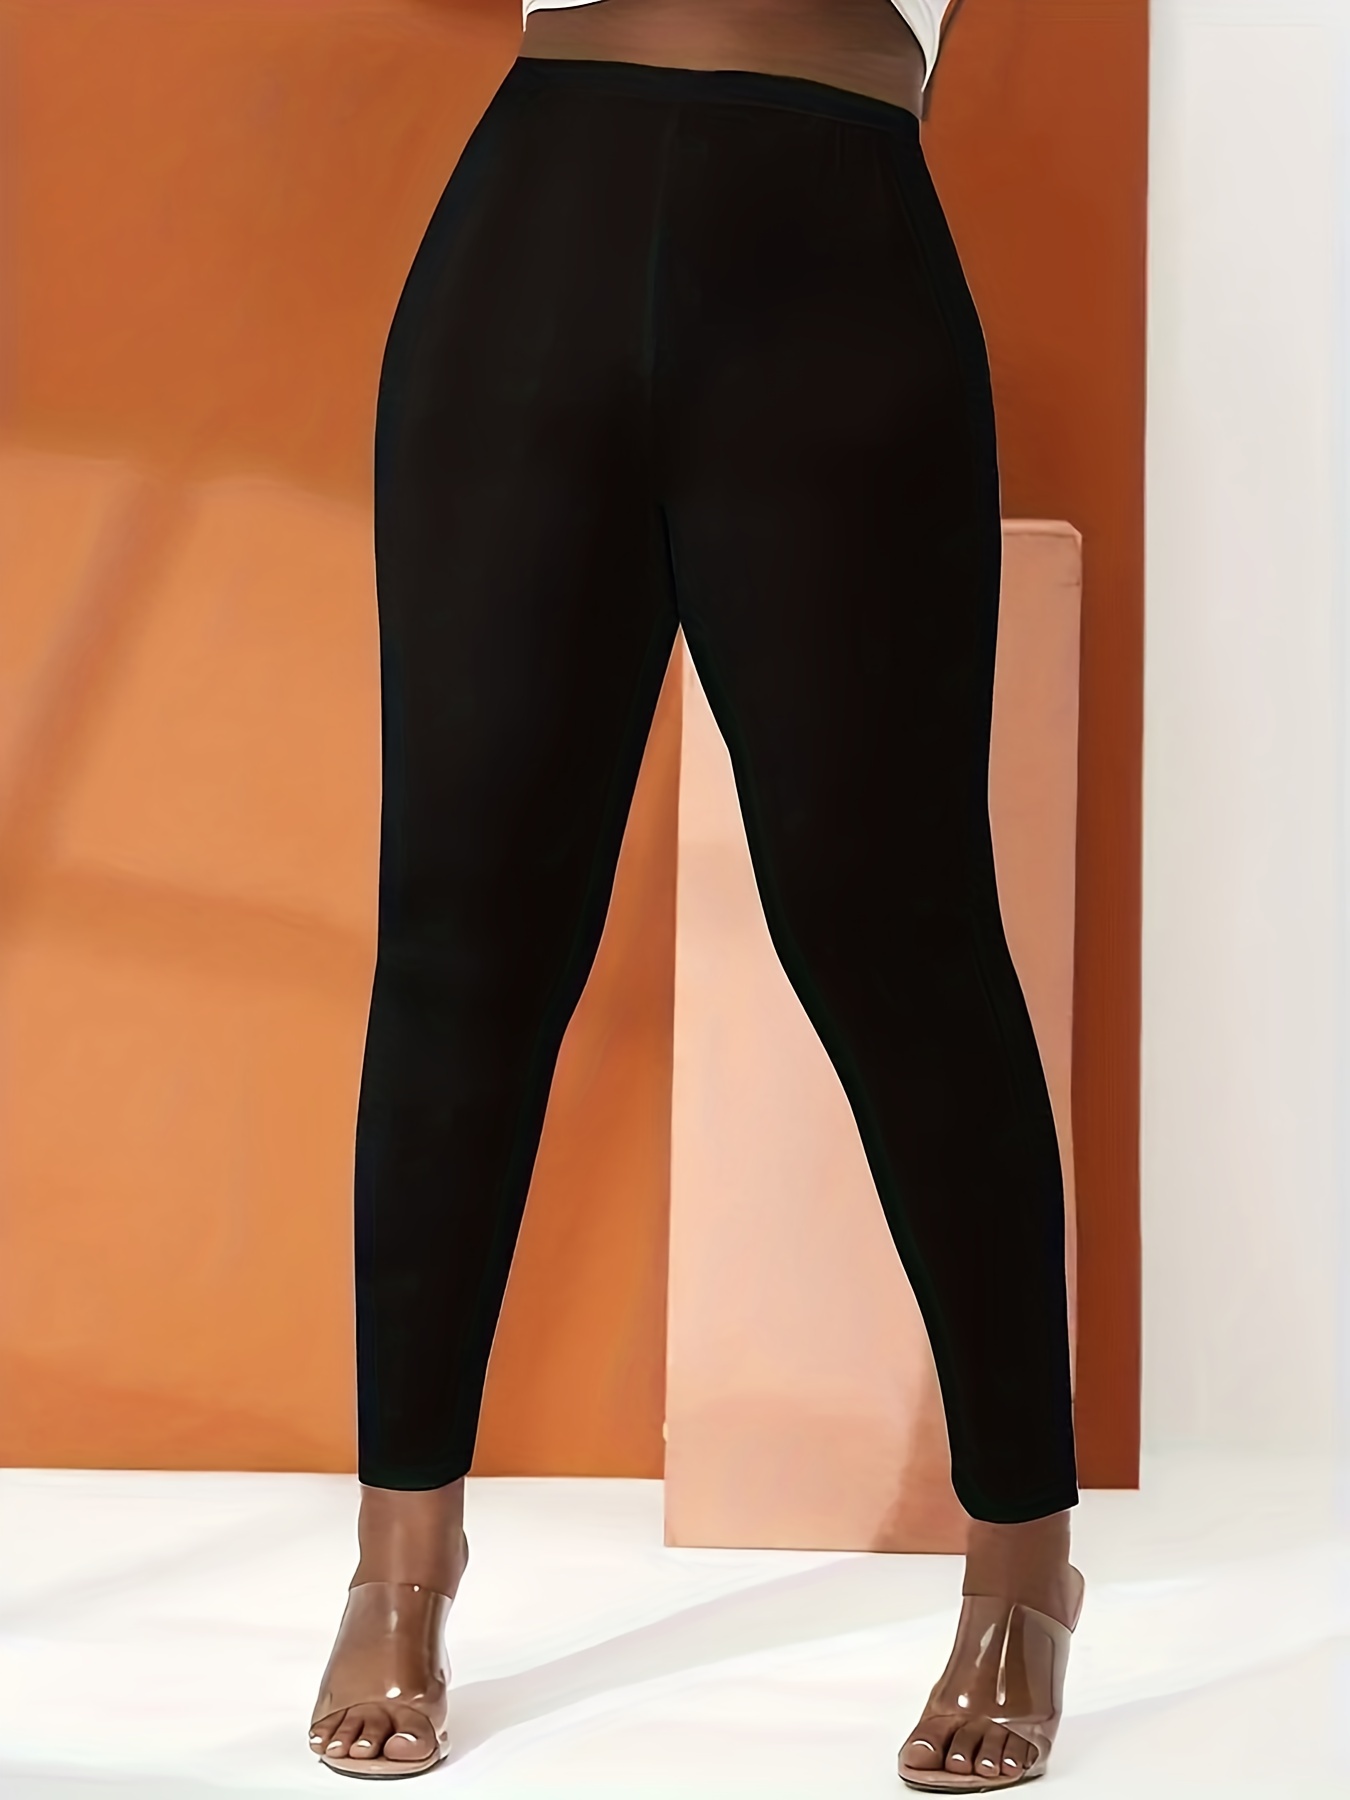 Plus Size Solid Color High Waist Leggings; Women's Plus Casual High Stretch  Skinny Leggings